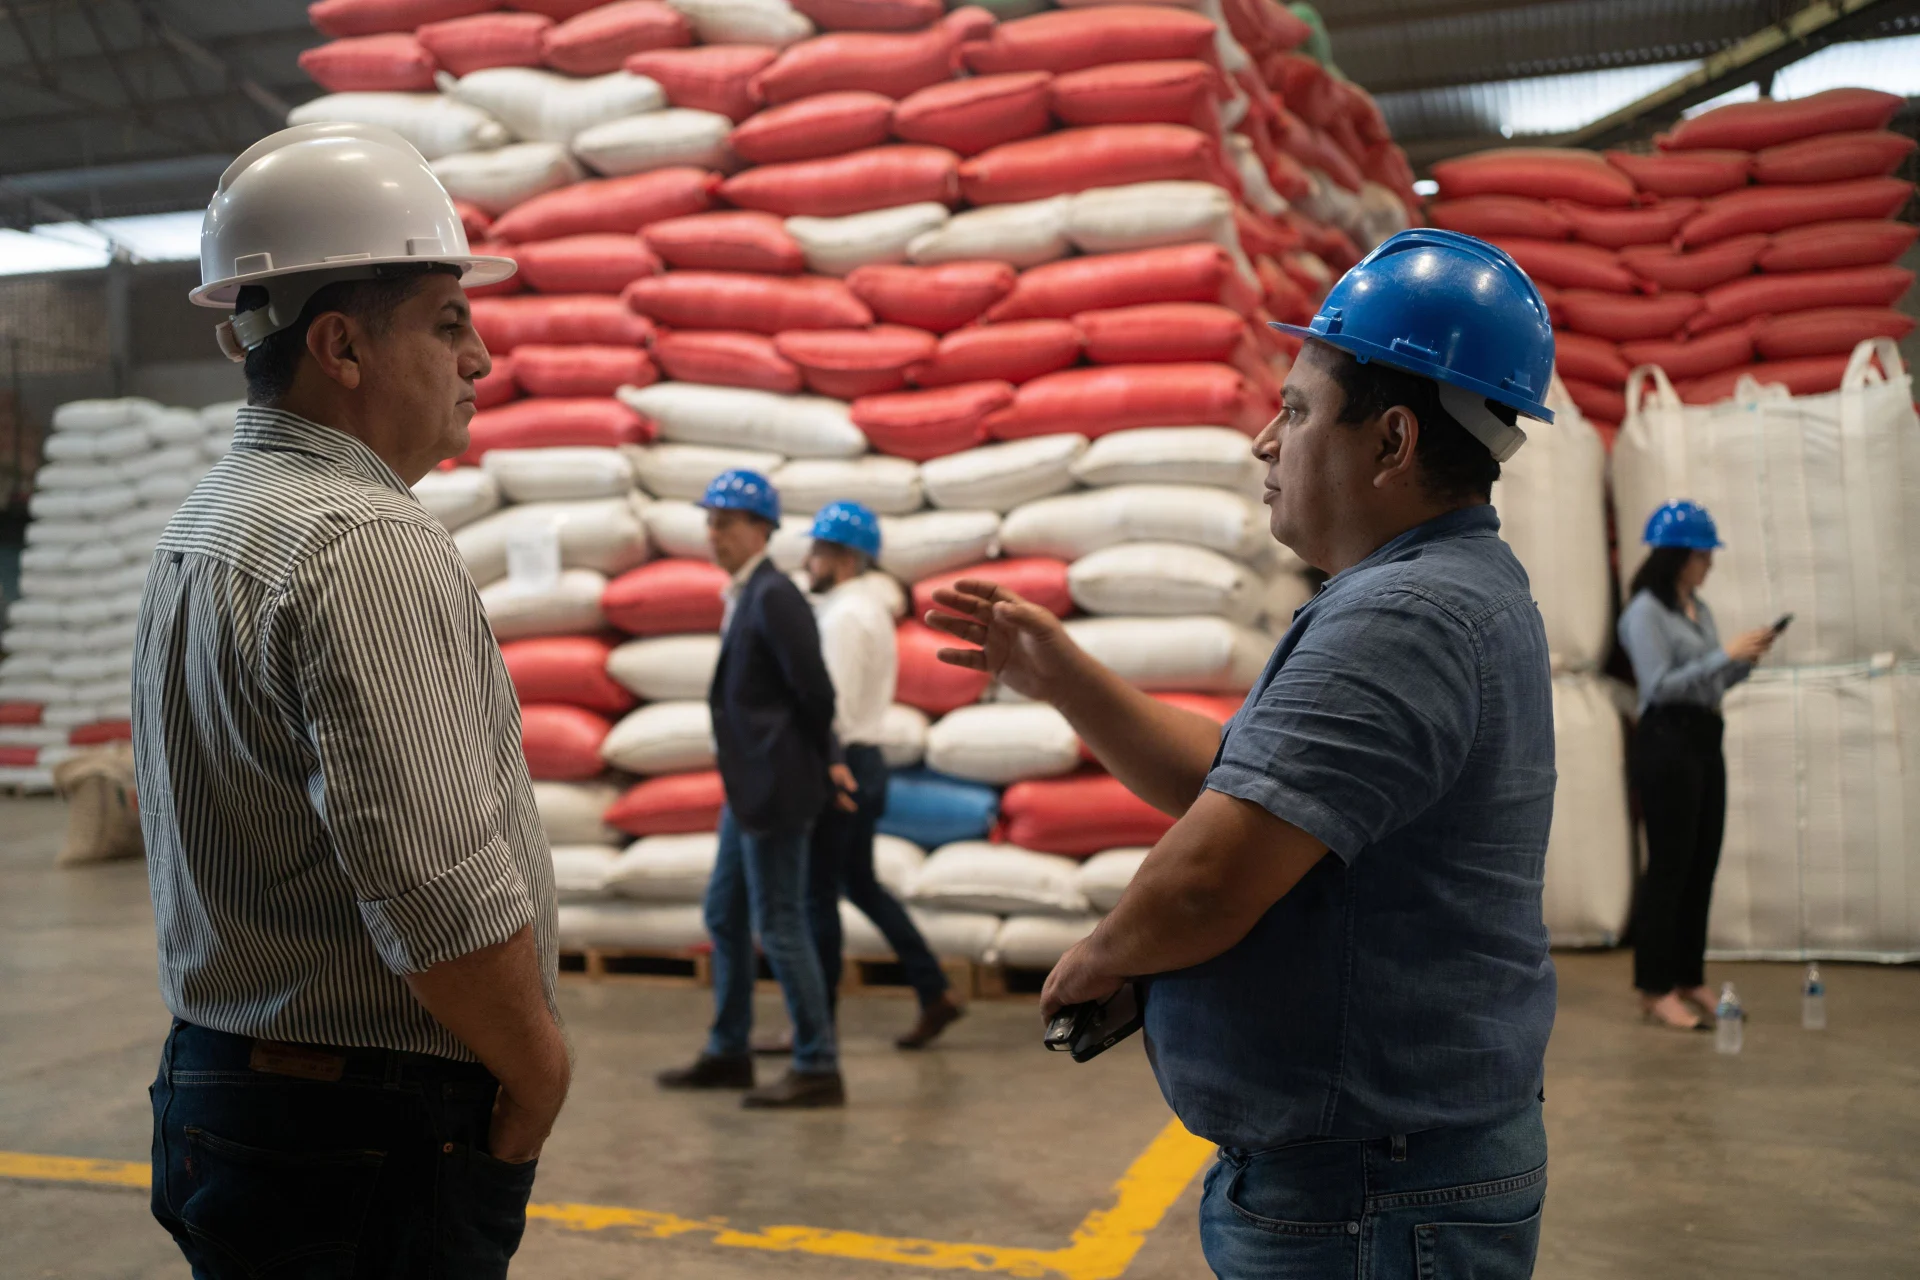  Two workers stand in a warehouse and discuss with each other